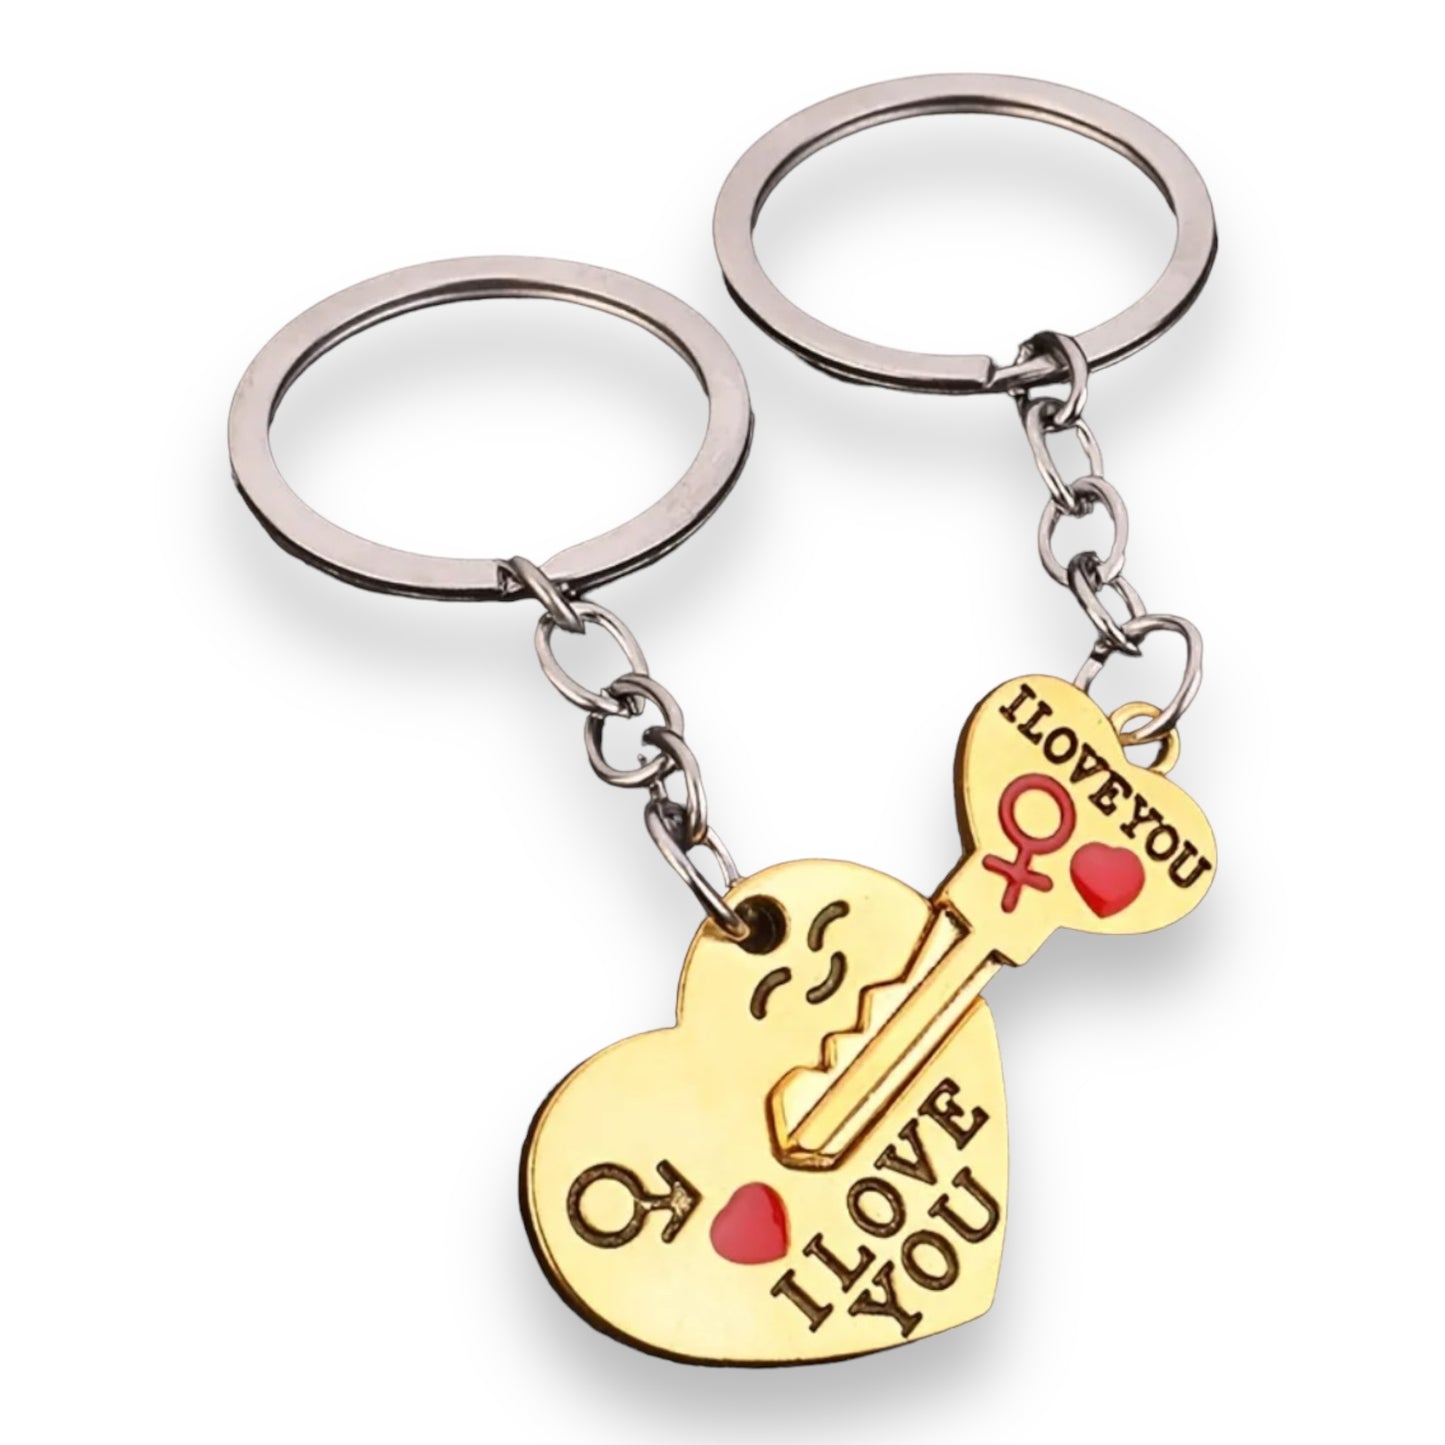 Kinky Pleasure - T031 - Keychain Key And Heart For Ever Together - 2 Models